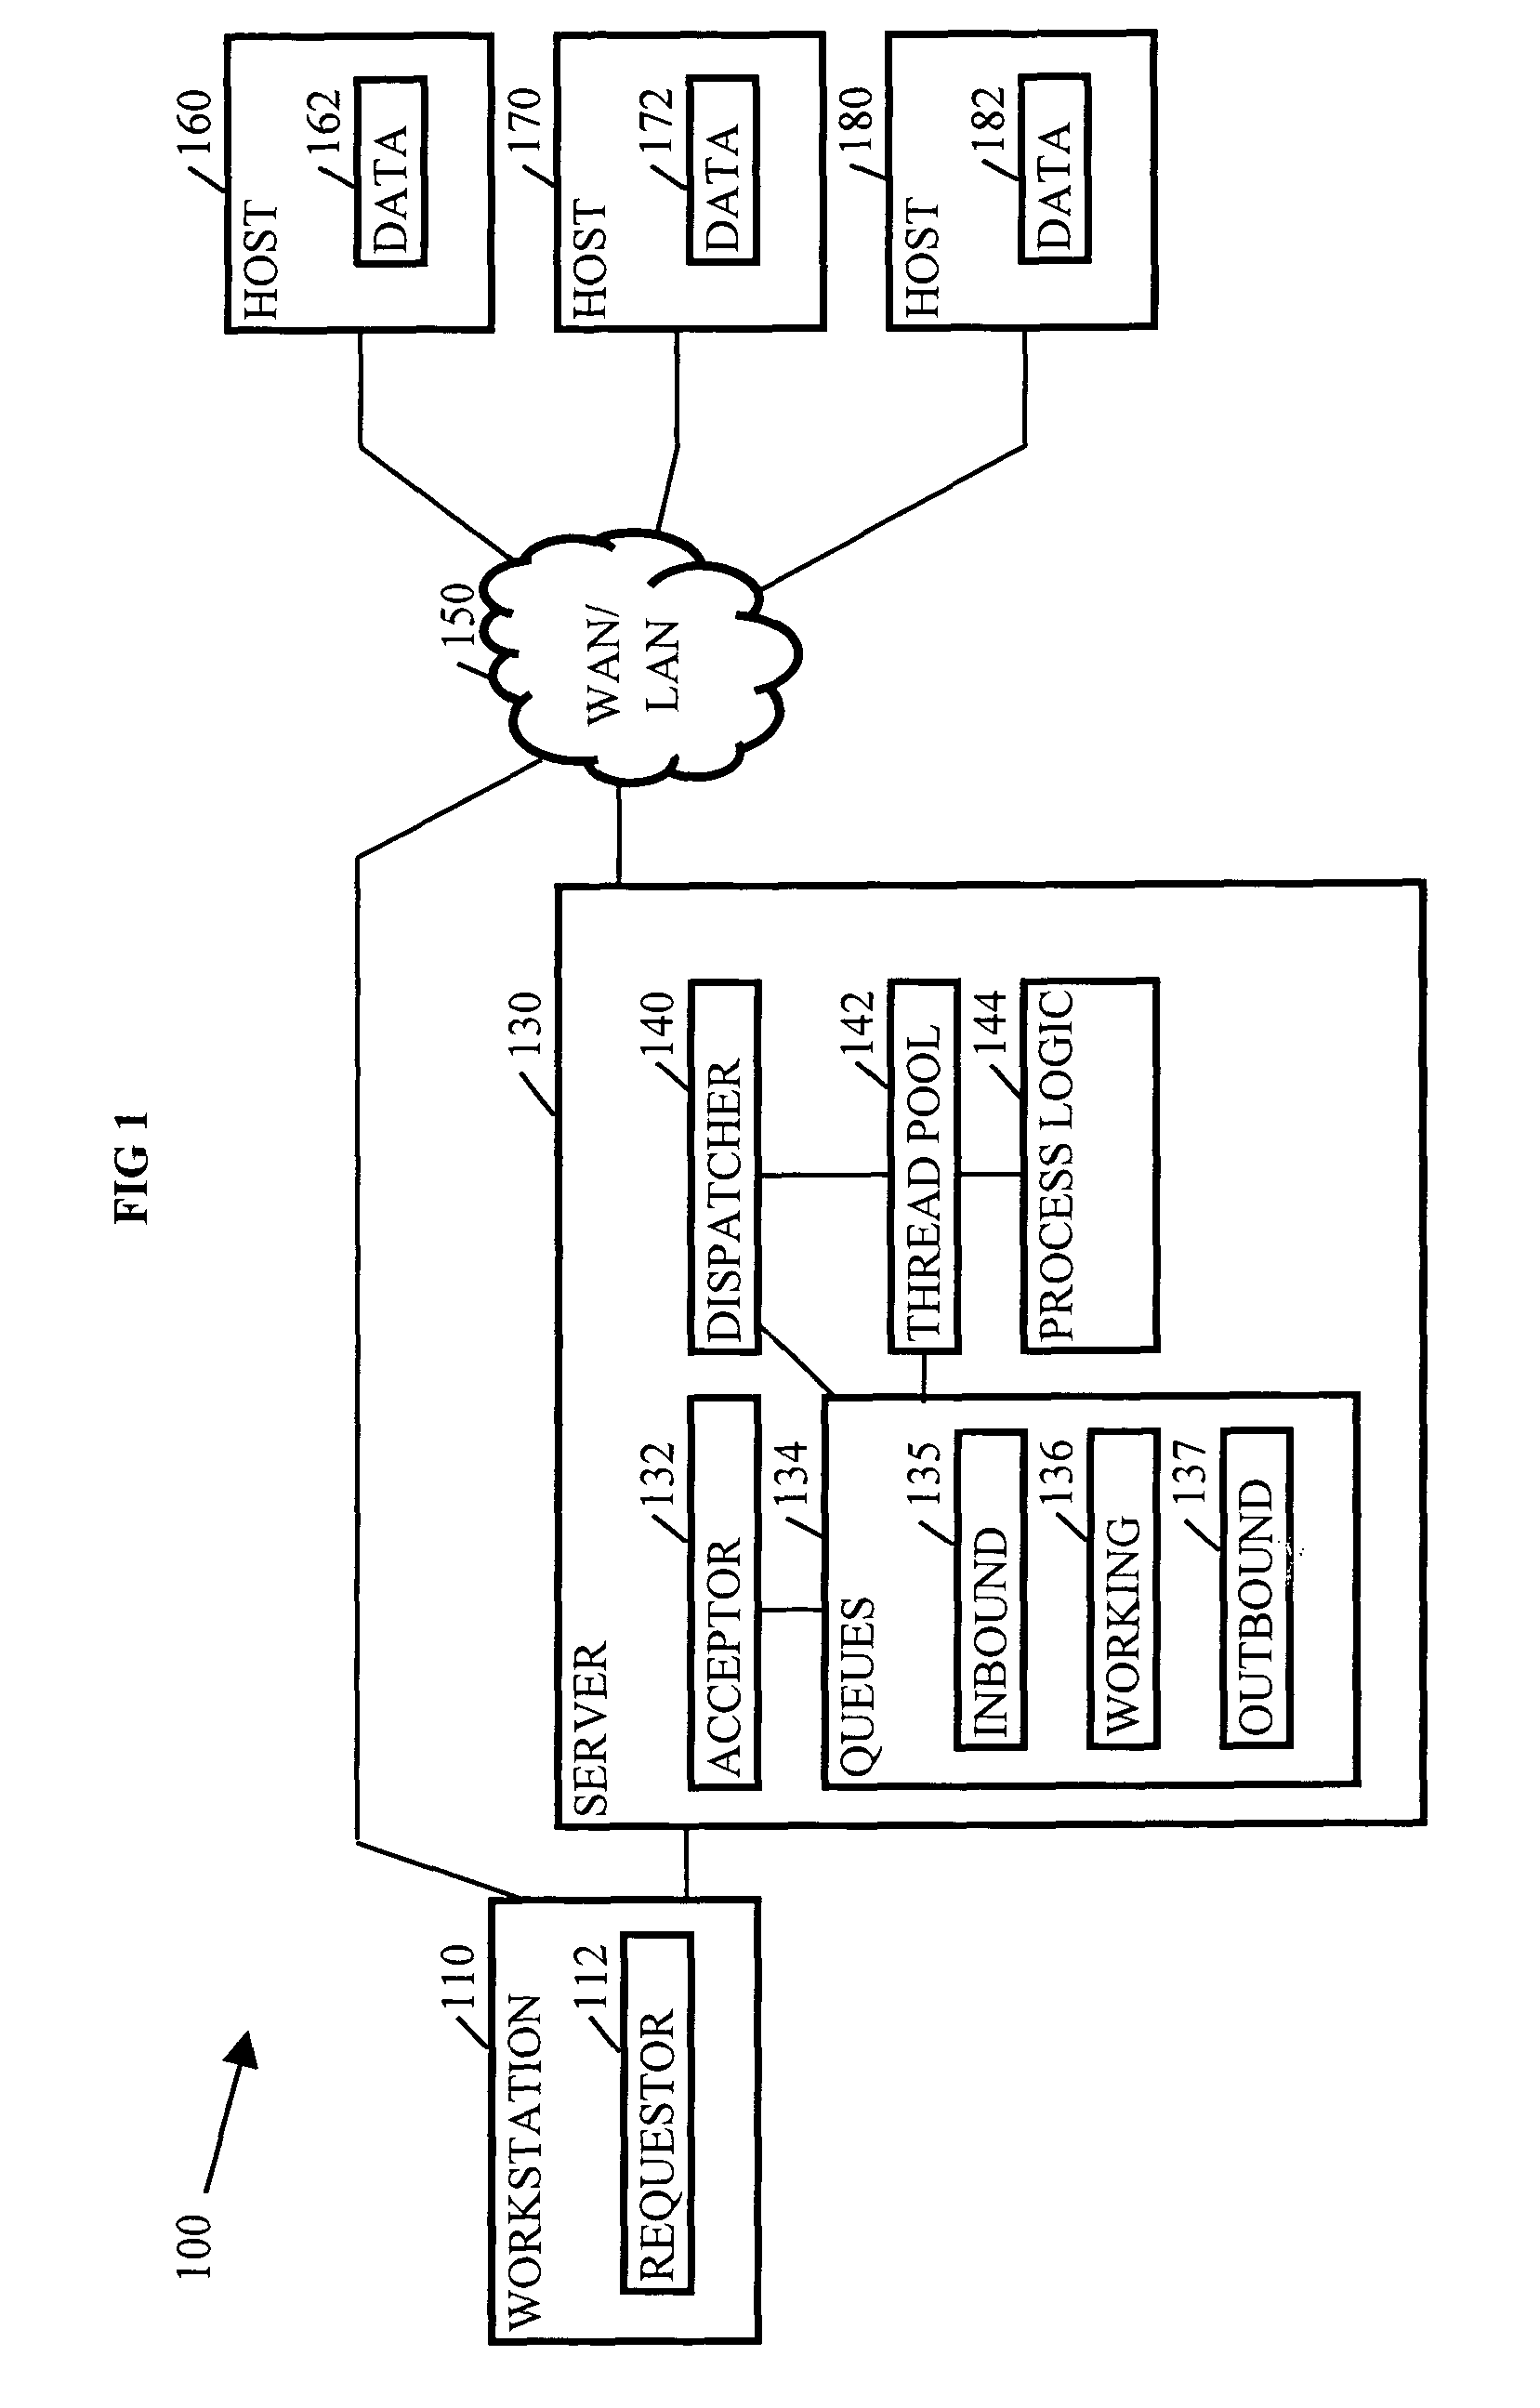 Methods, systems, and media to enhance persistence of a message